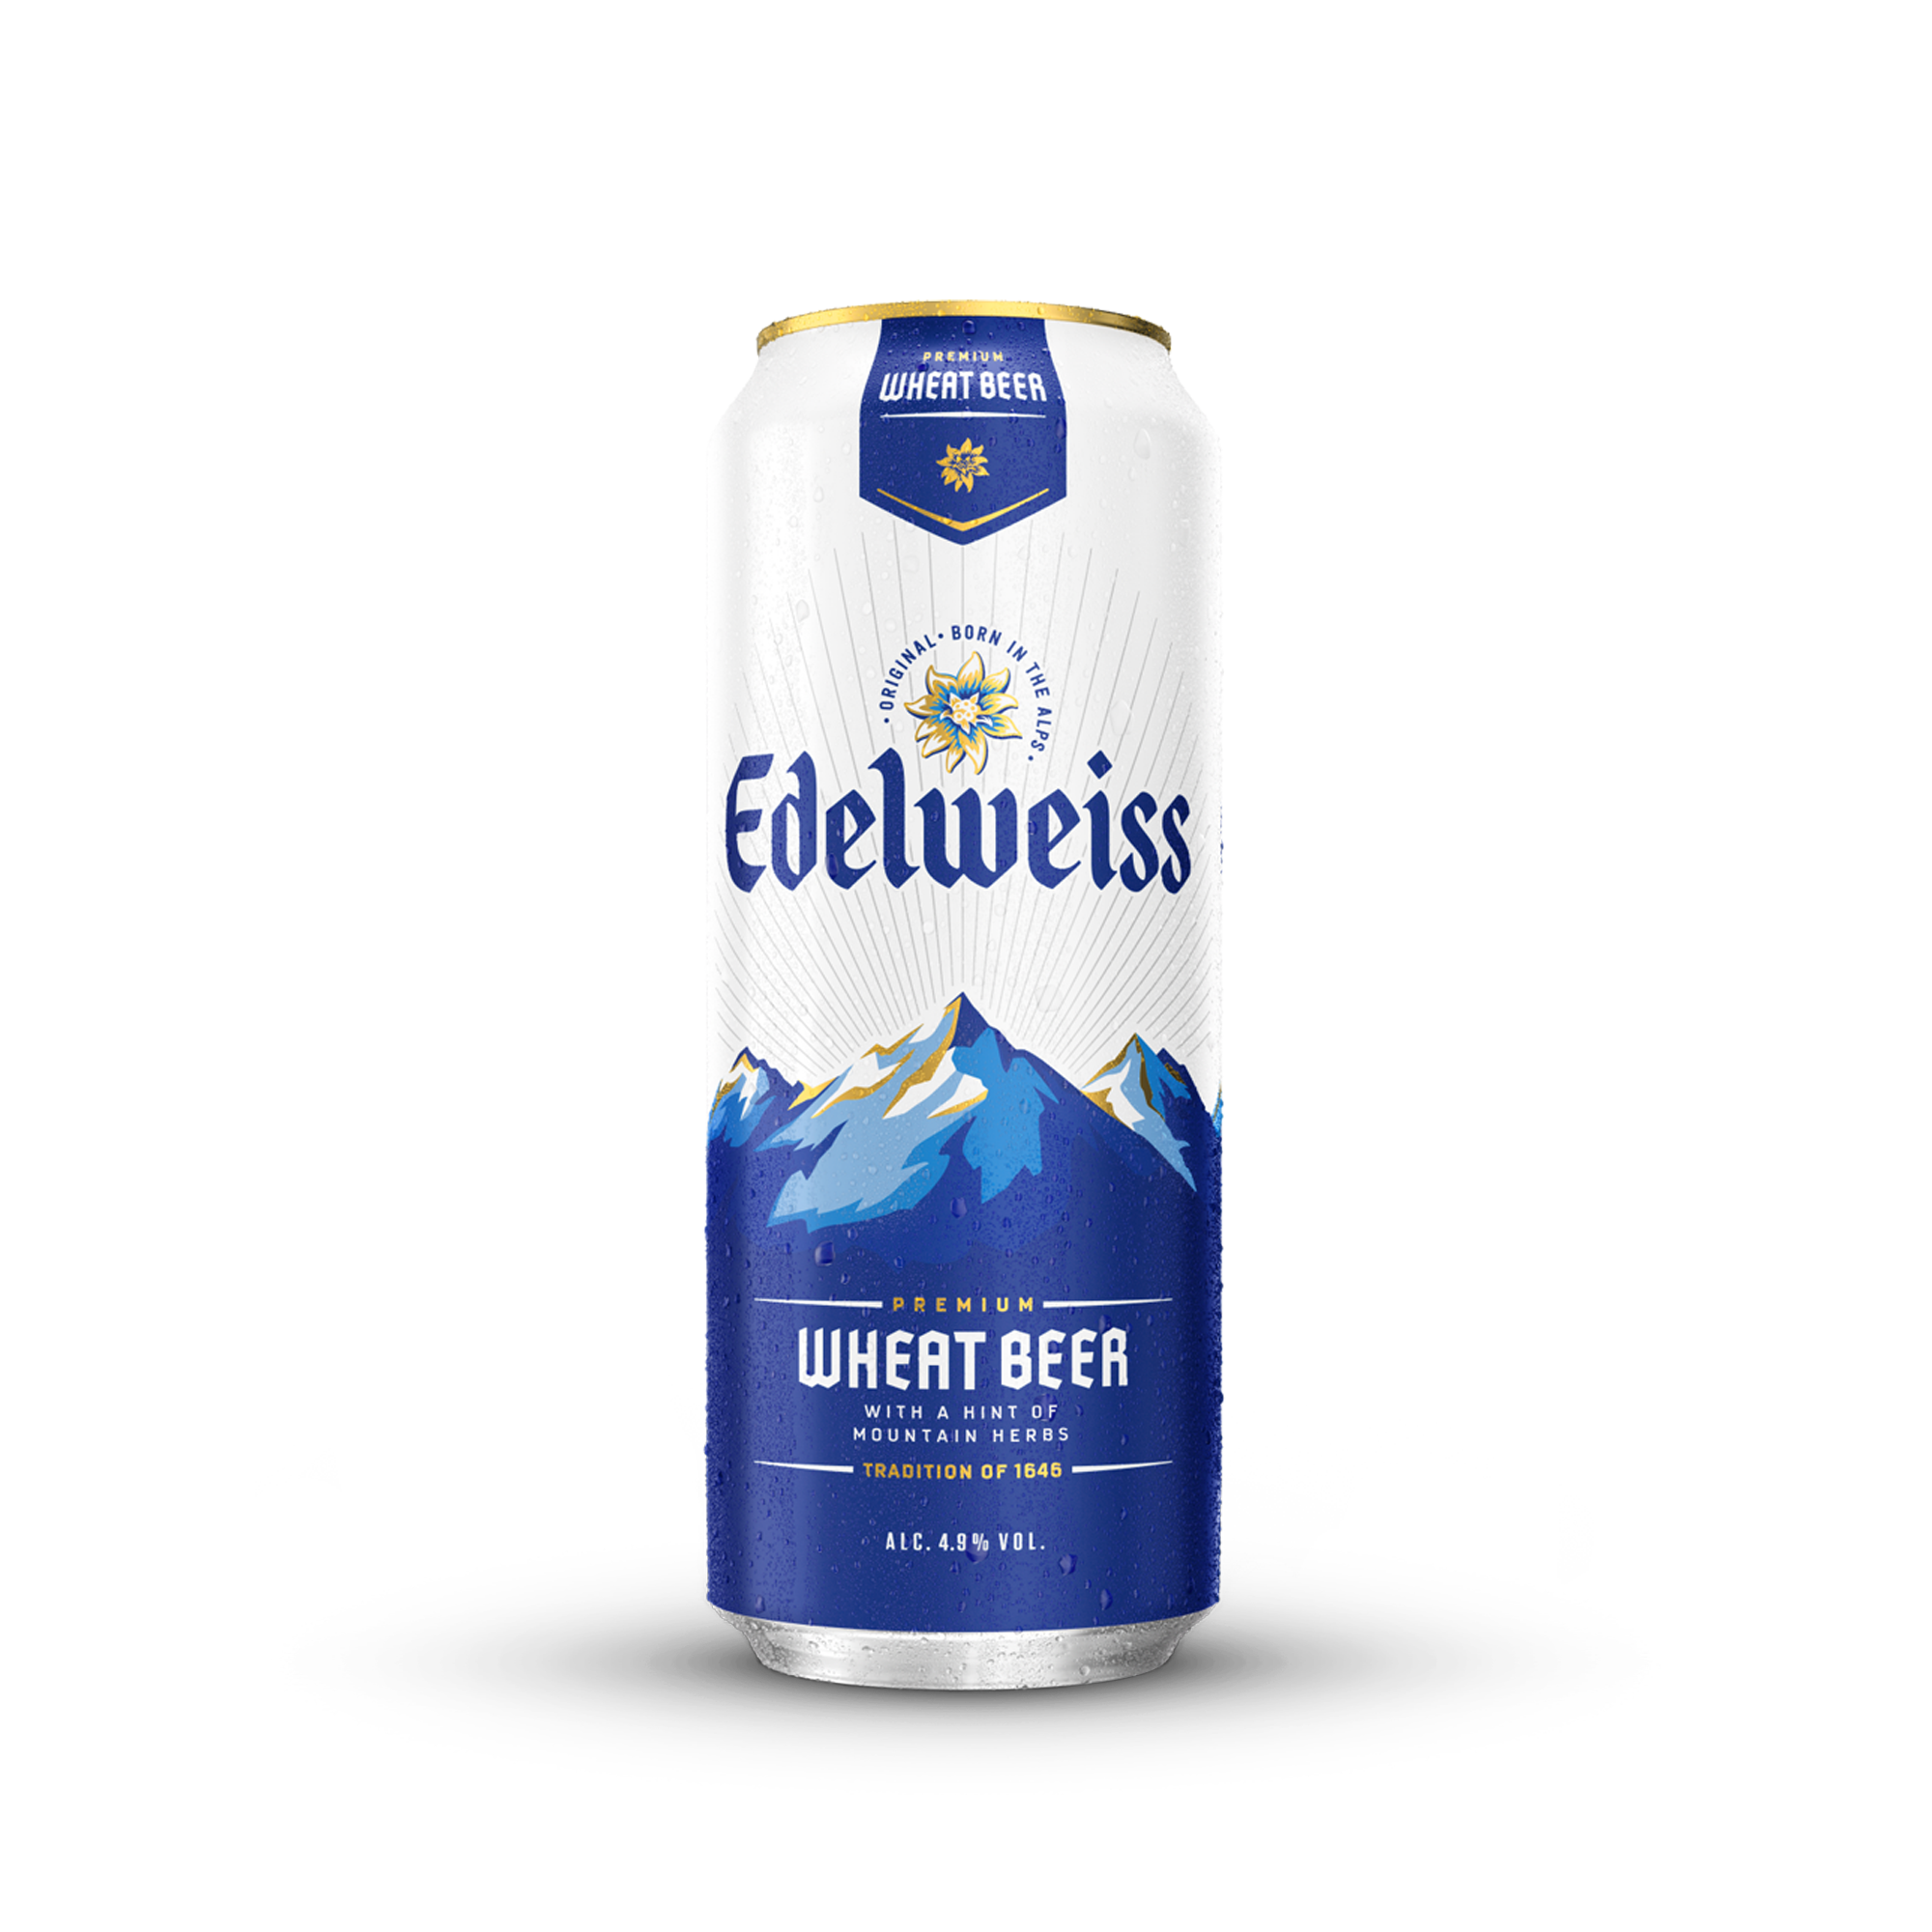 Edelweiss Wheat Beer Can Image (With Shade)